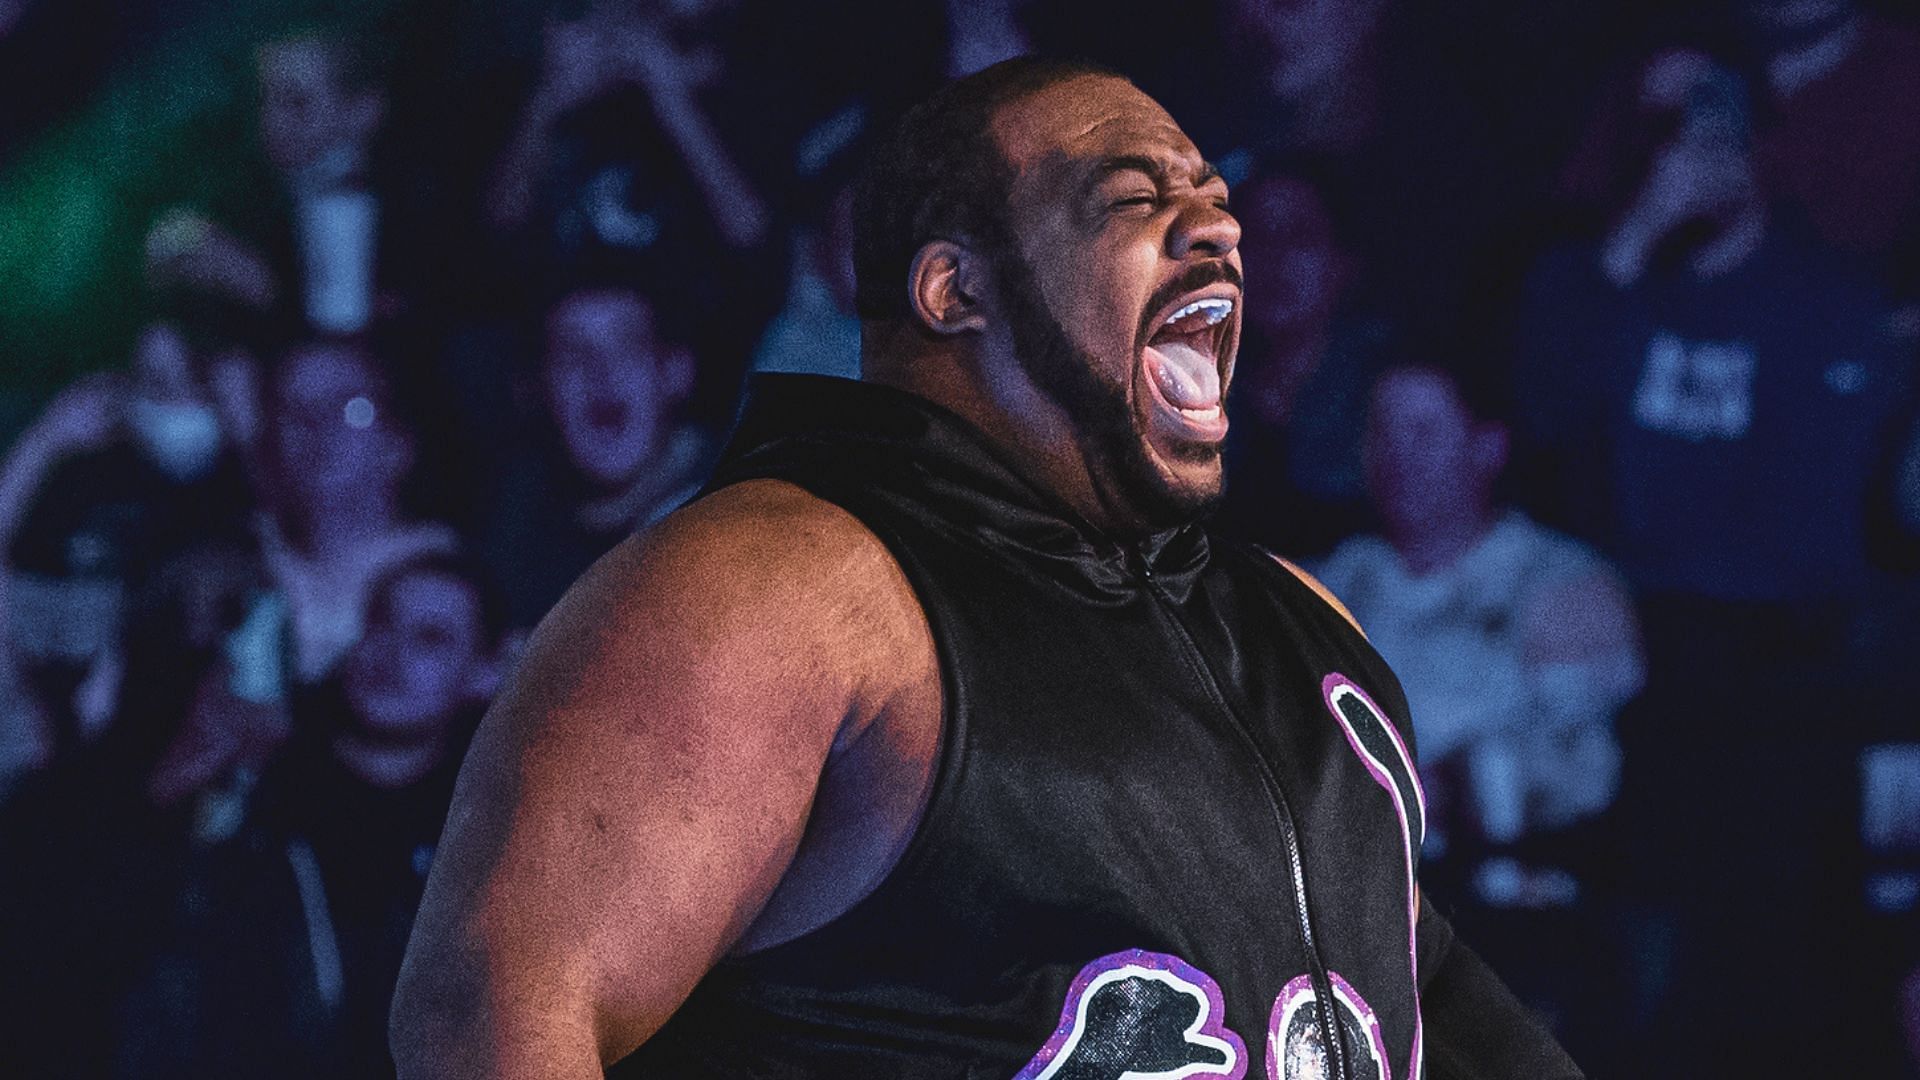 Keith Lee making his AEW debut in 2022